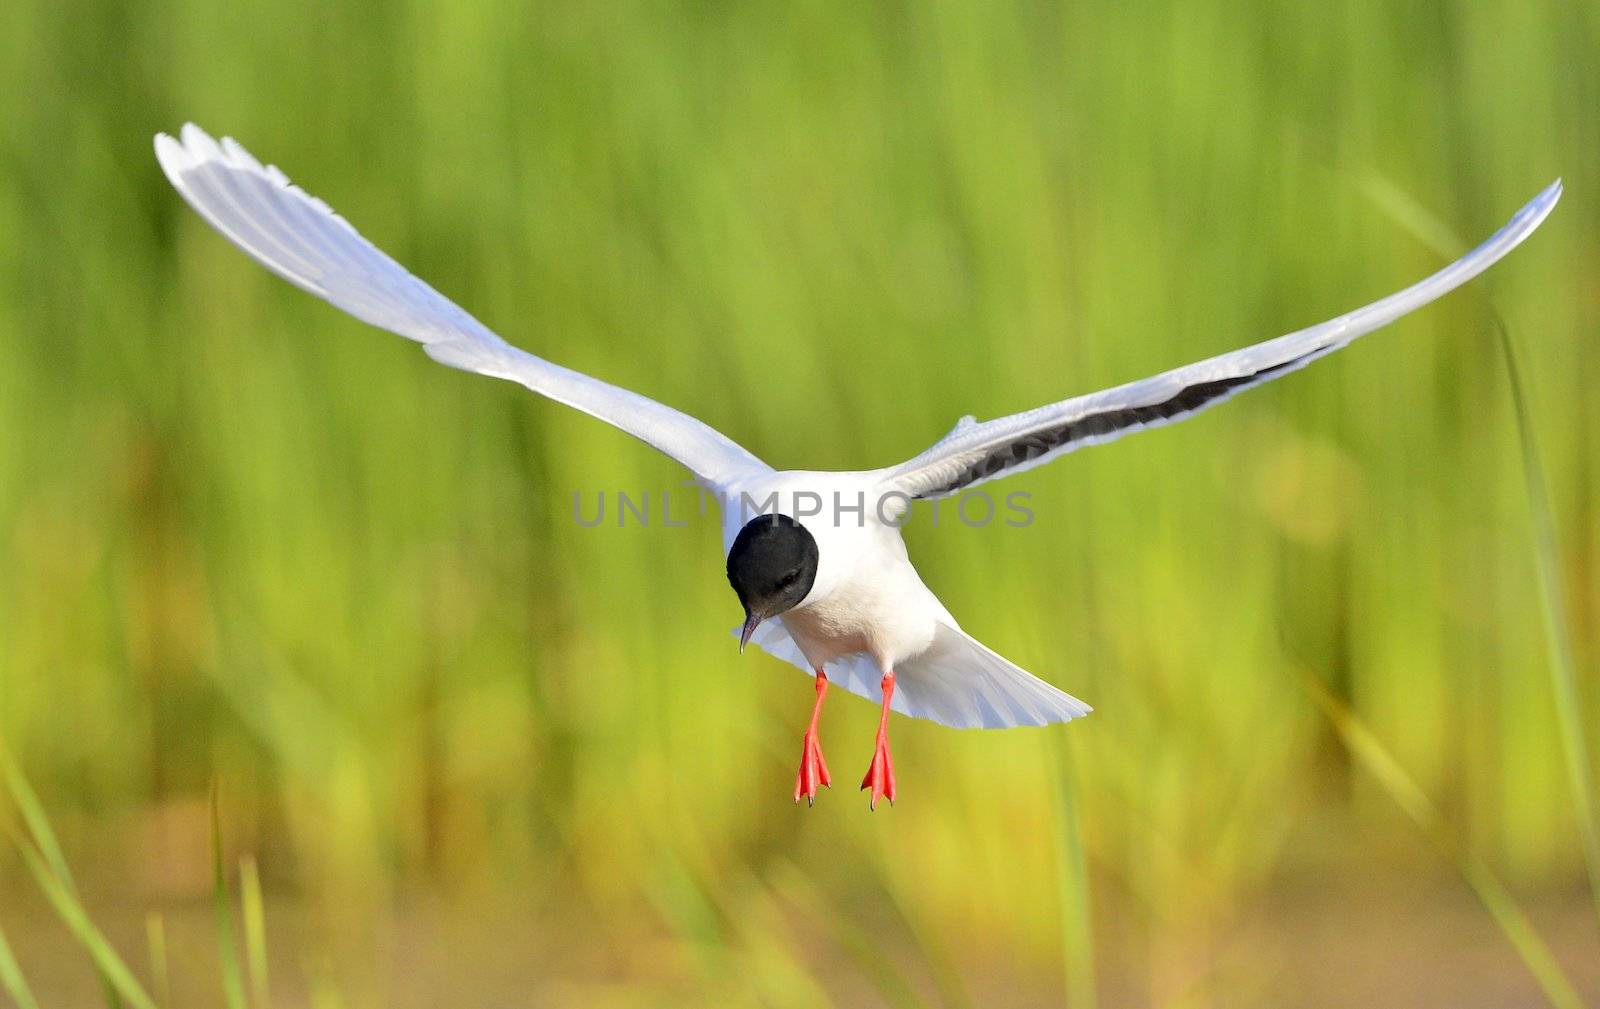 the front of Black-headed Gull (Larus ridibundus) flying by SURZ